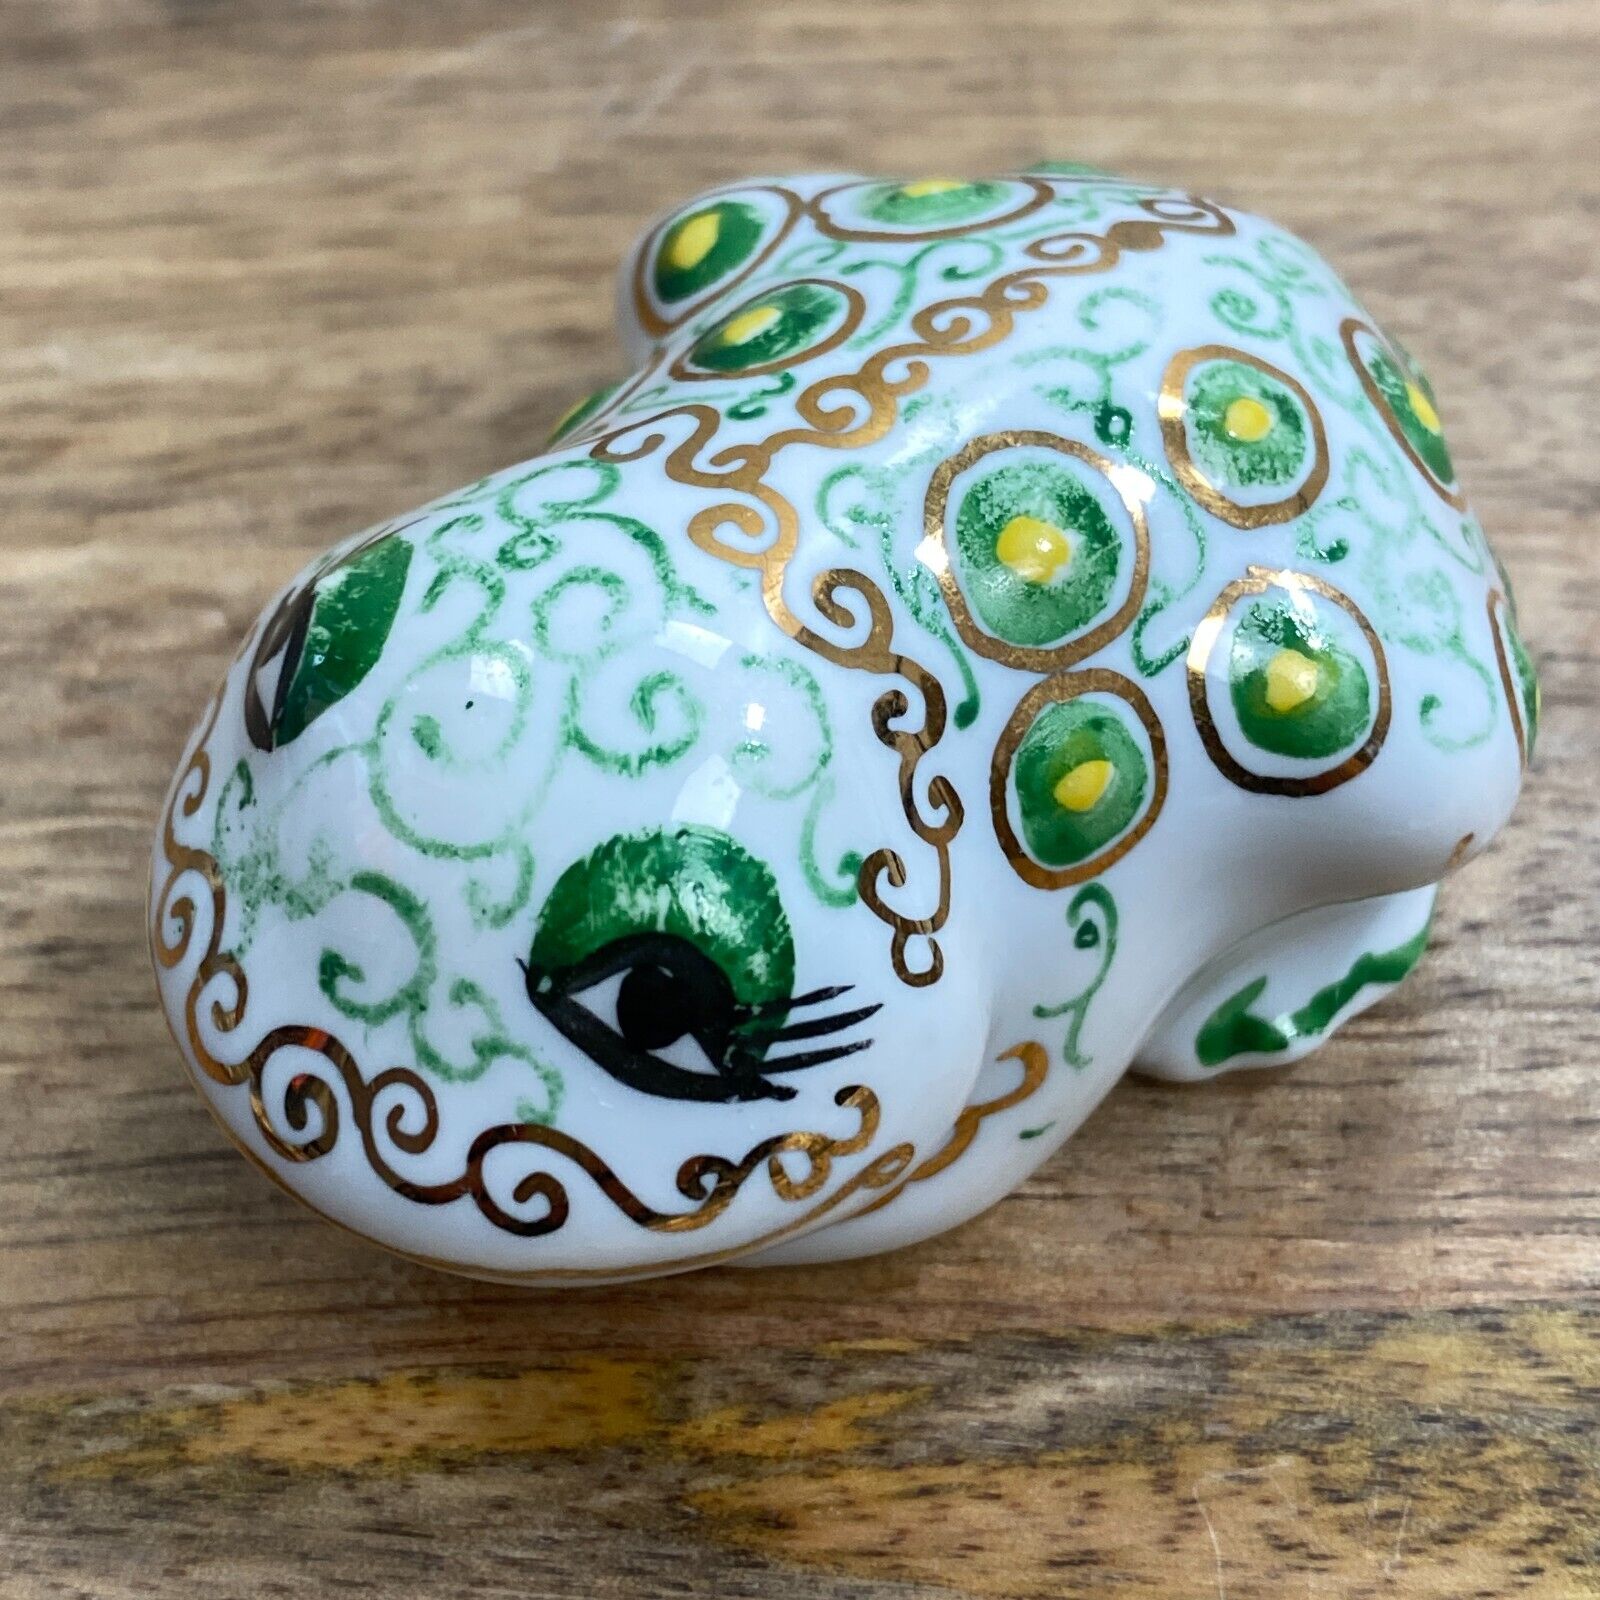 Ceramic Pottery Miniature Frog White Green Swirl and Gold